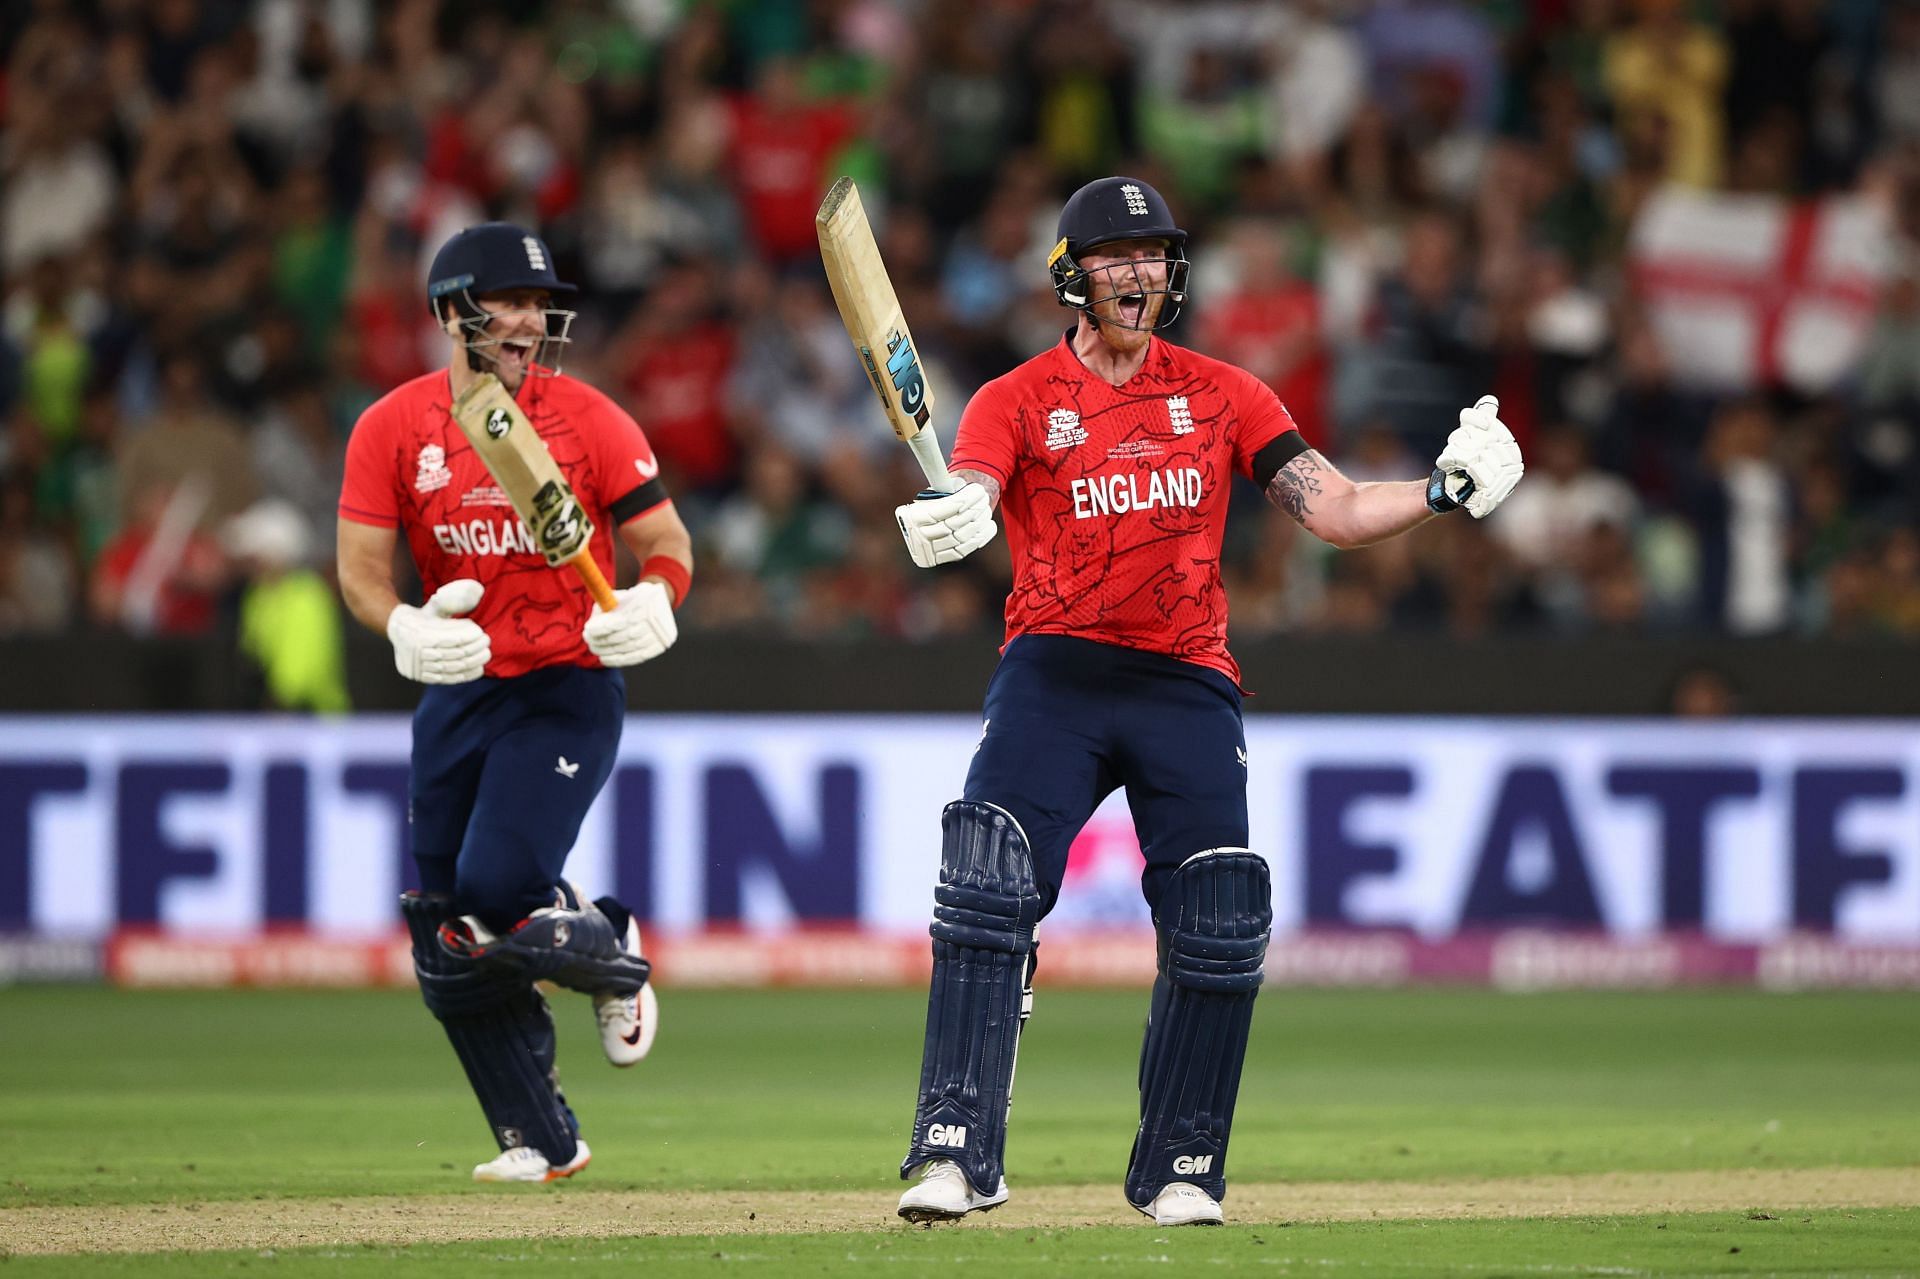 T20 World Cup 2022: Defiant Stokes lifts England to 5-wicket triumph over Pakistan in low-scoring final